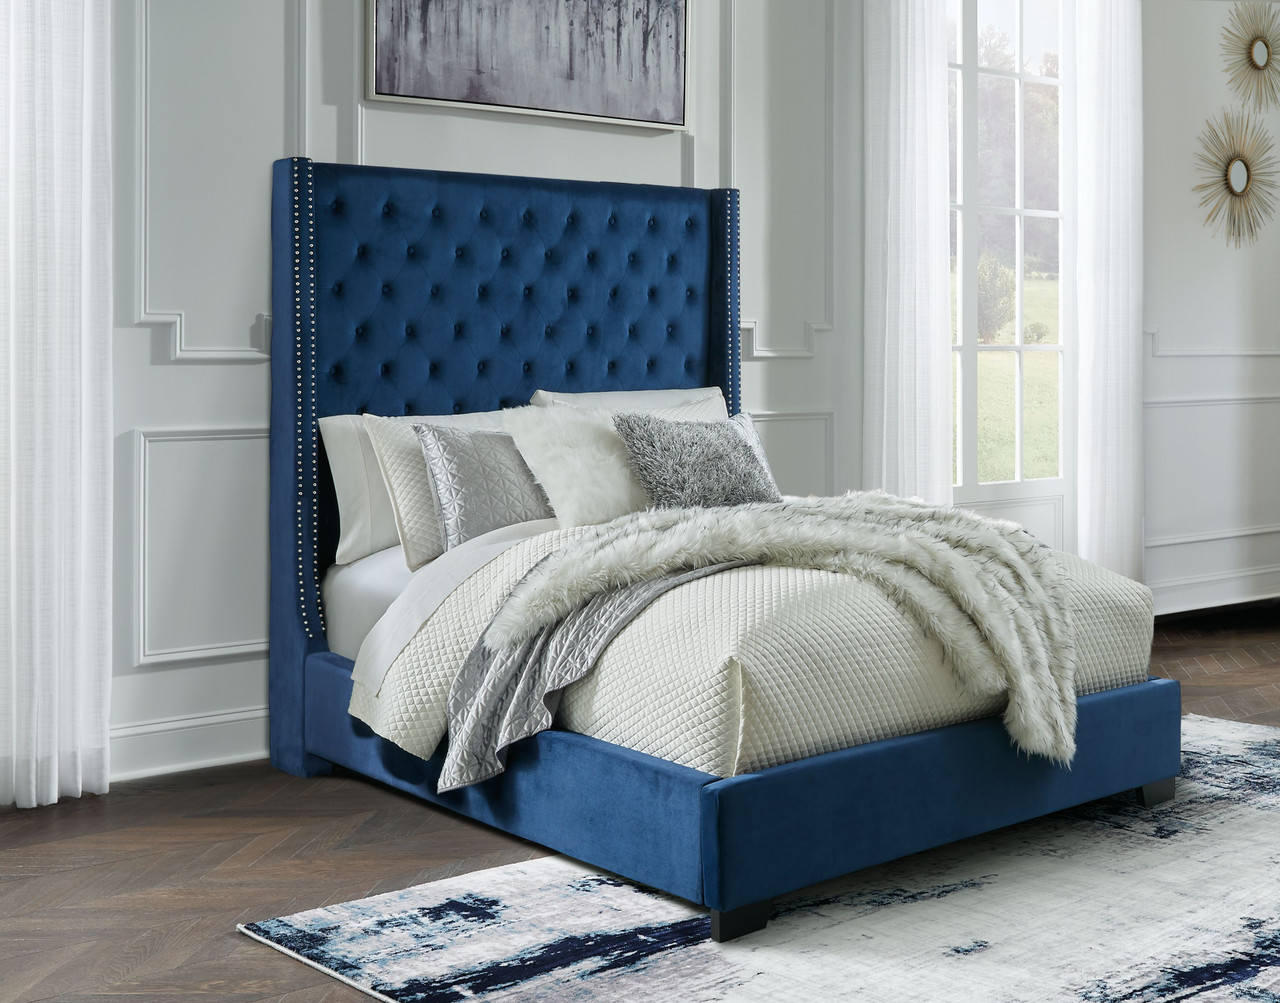 The Coralayne Blue Queen Upholstered Bed is available at Complete